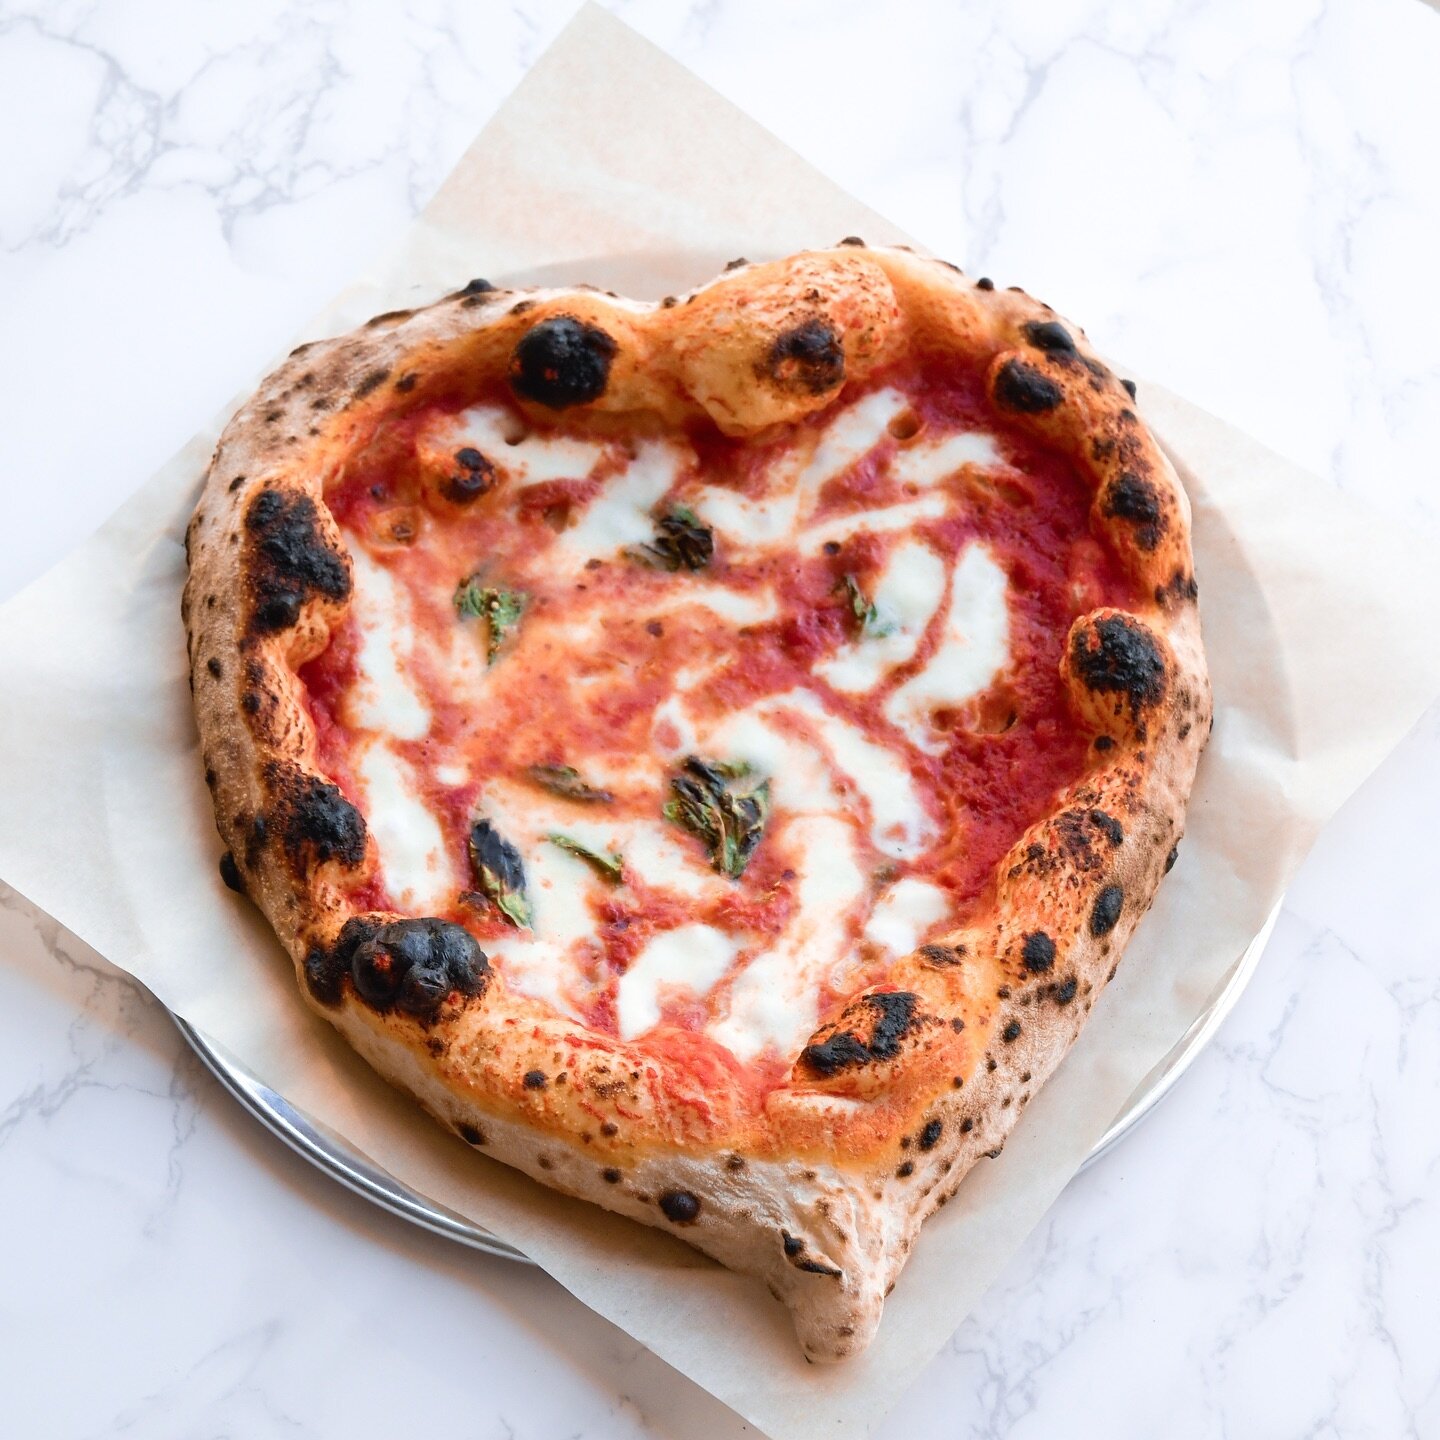 Fall in love with more than just pizza this Valentine&rsquo;s Day! Dive into a romantic Italian adventure with Strapoli, where every bite feels like a love letter. And don&rsquo;t forget, we&rsquo;re offering heart-shaped pizzas to make your meal eve